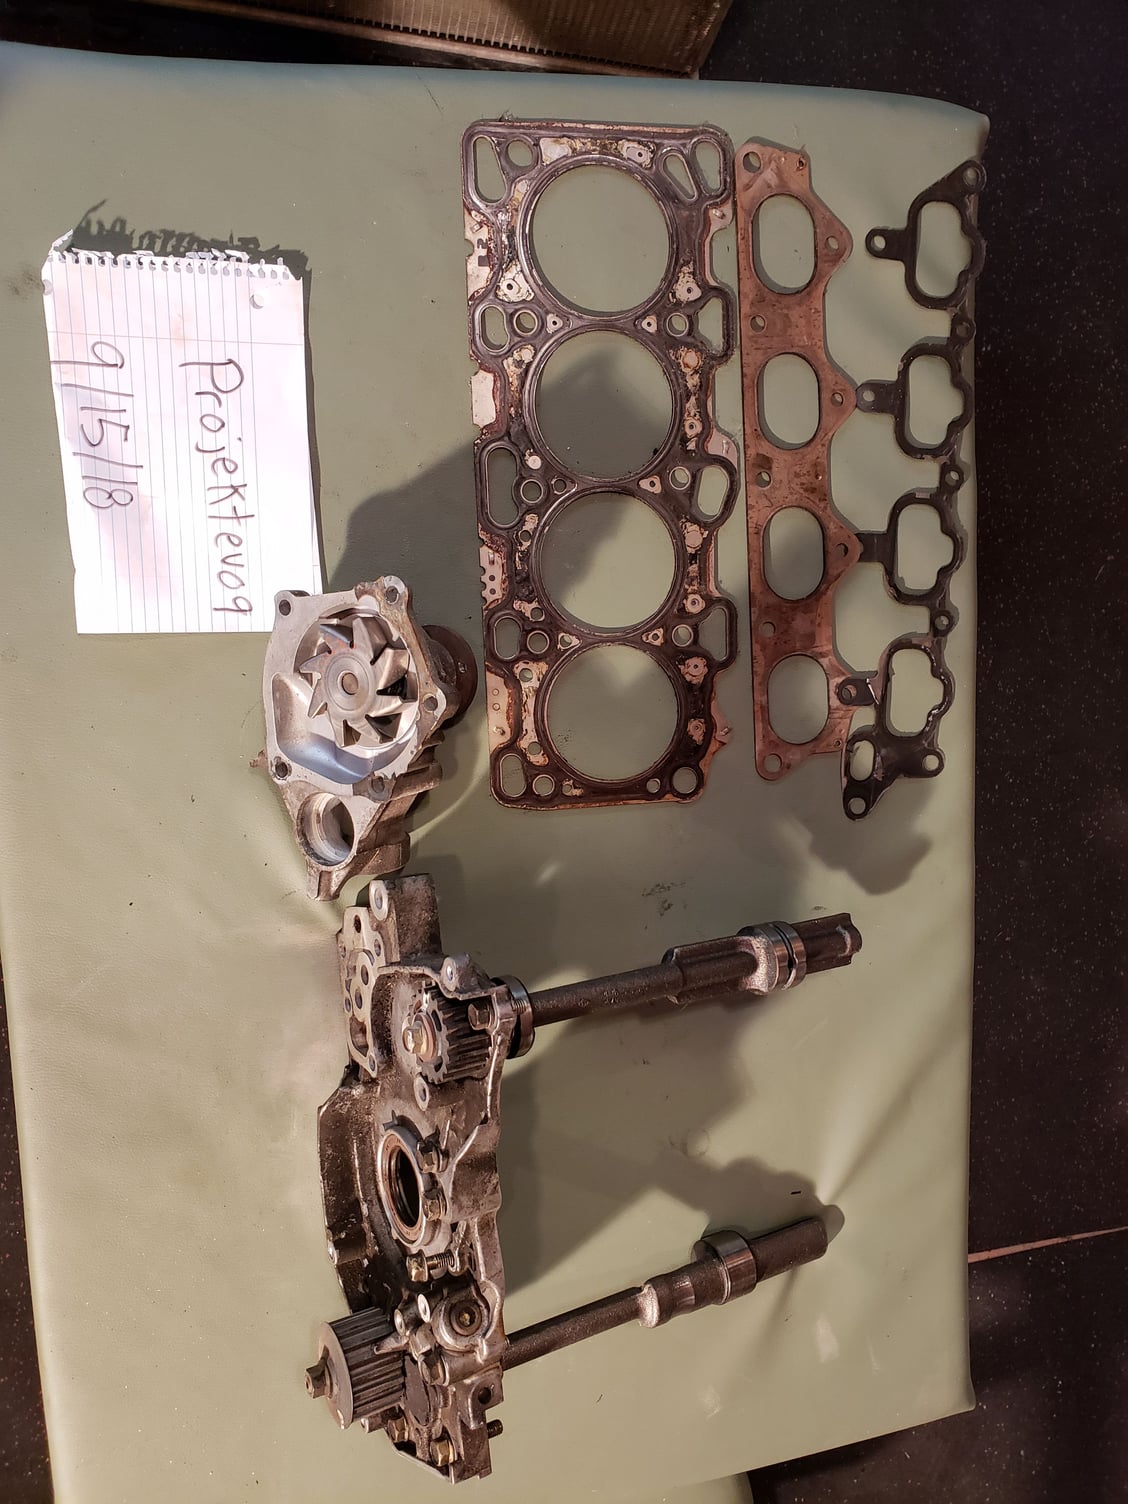 2003 Mitsubishi Lancer Evolution - Front Case/Water Pump/Gaskets - Miscellaneous - $1 - Altoona, PA 16602, United States